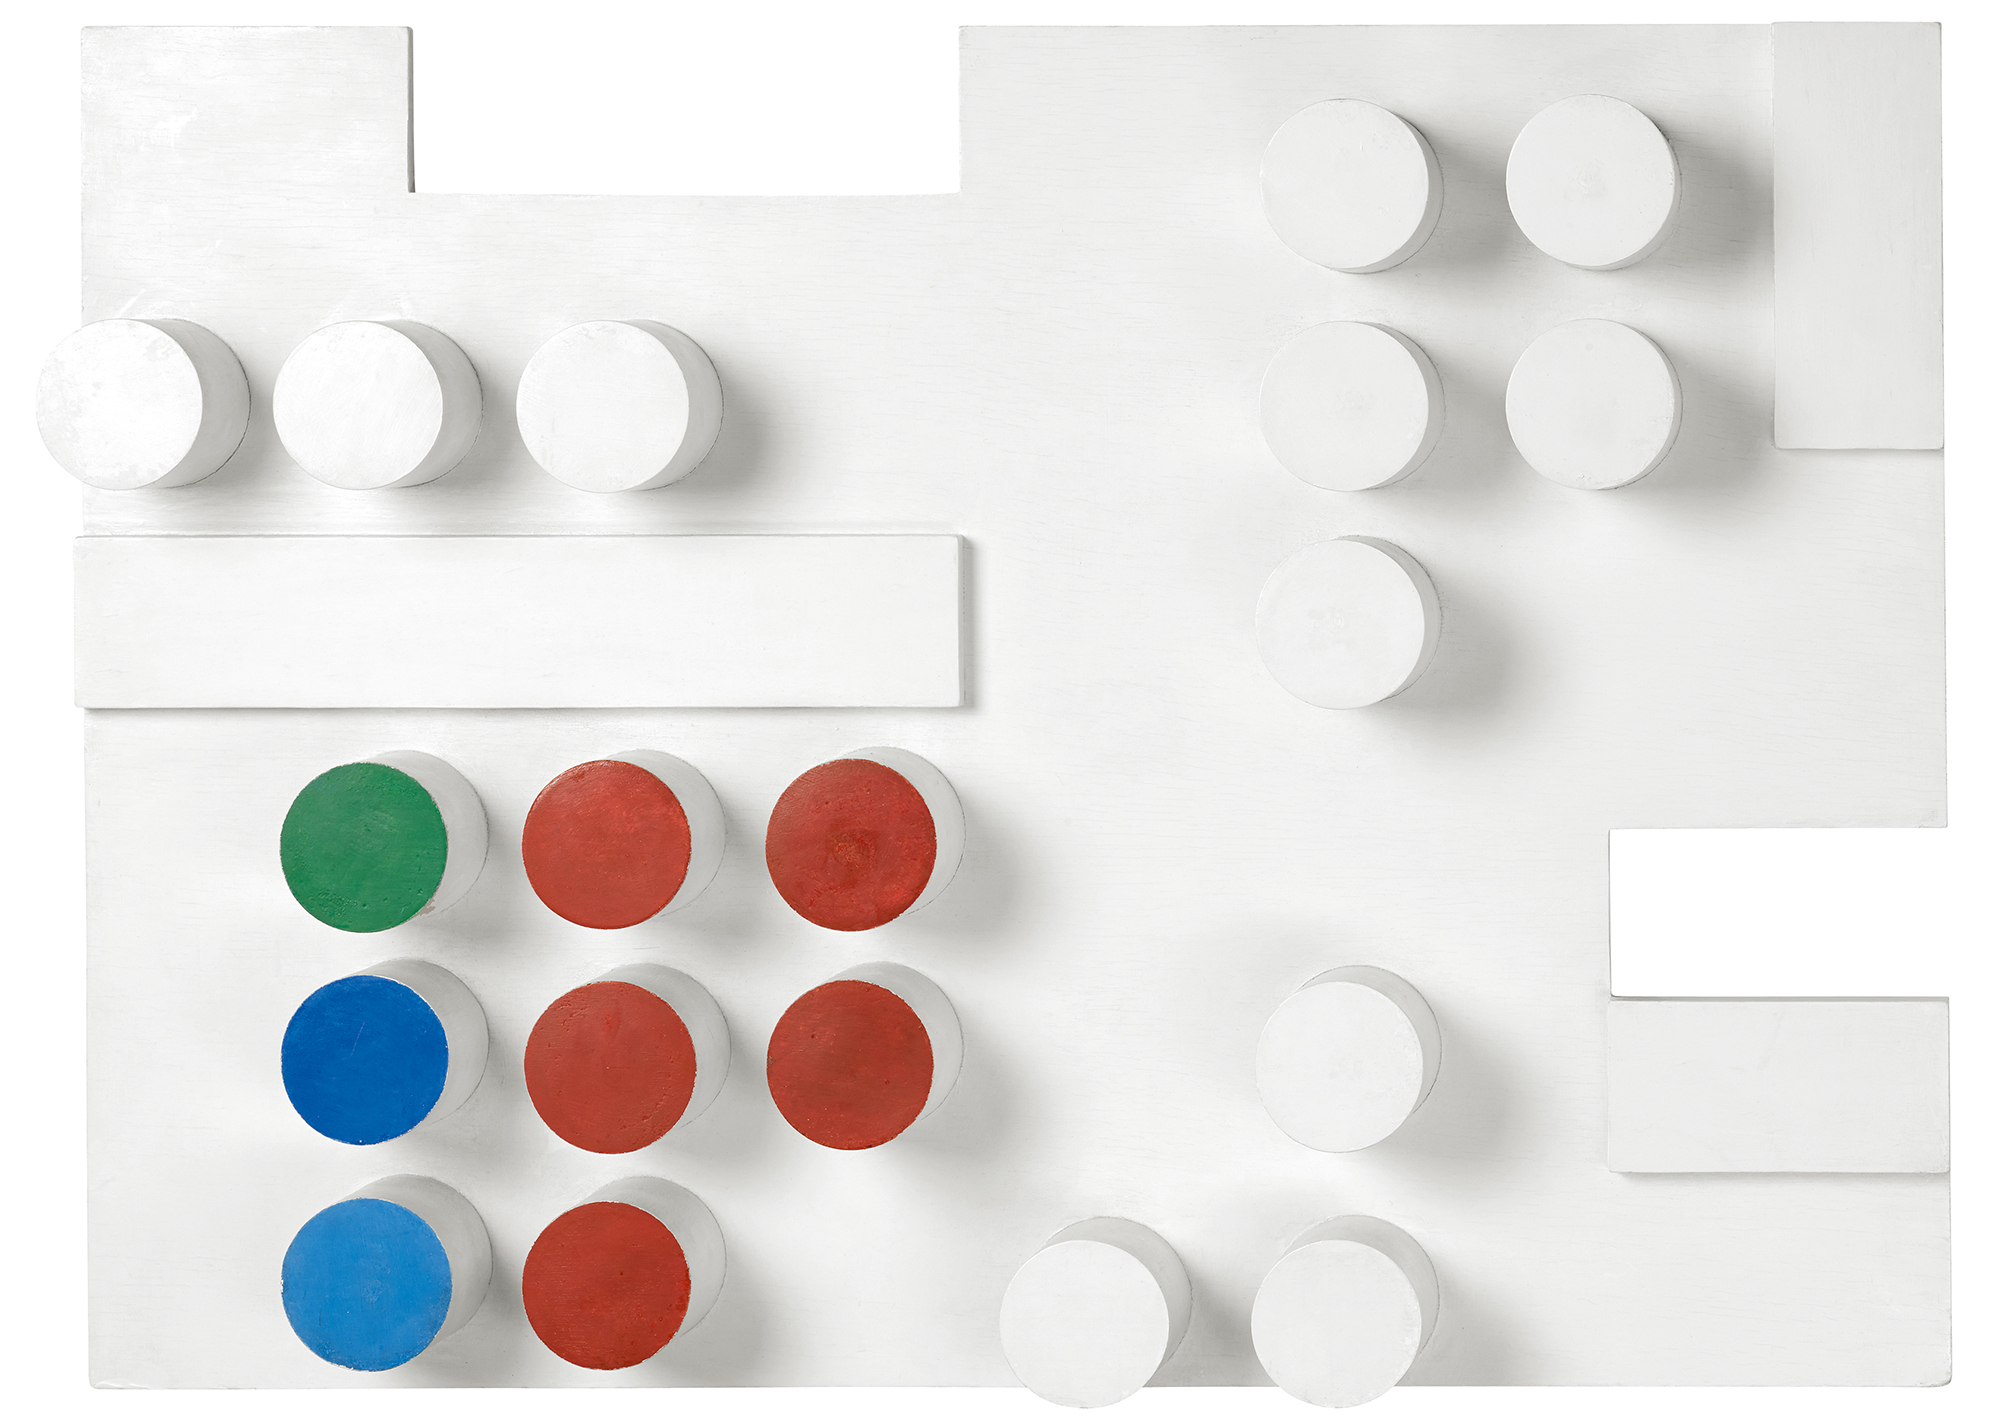 A horizontal composition is mostly white and includes numerous rounded pegs protruding from the support. A few of these protruding pegs at lower left are colored blue, green, and red.